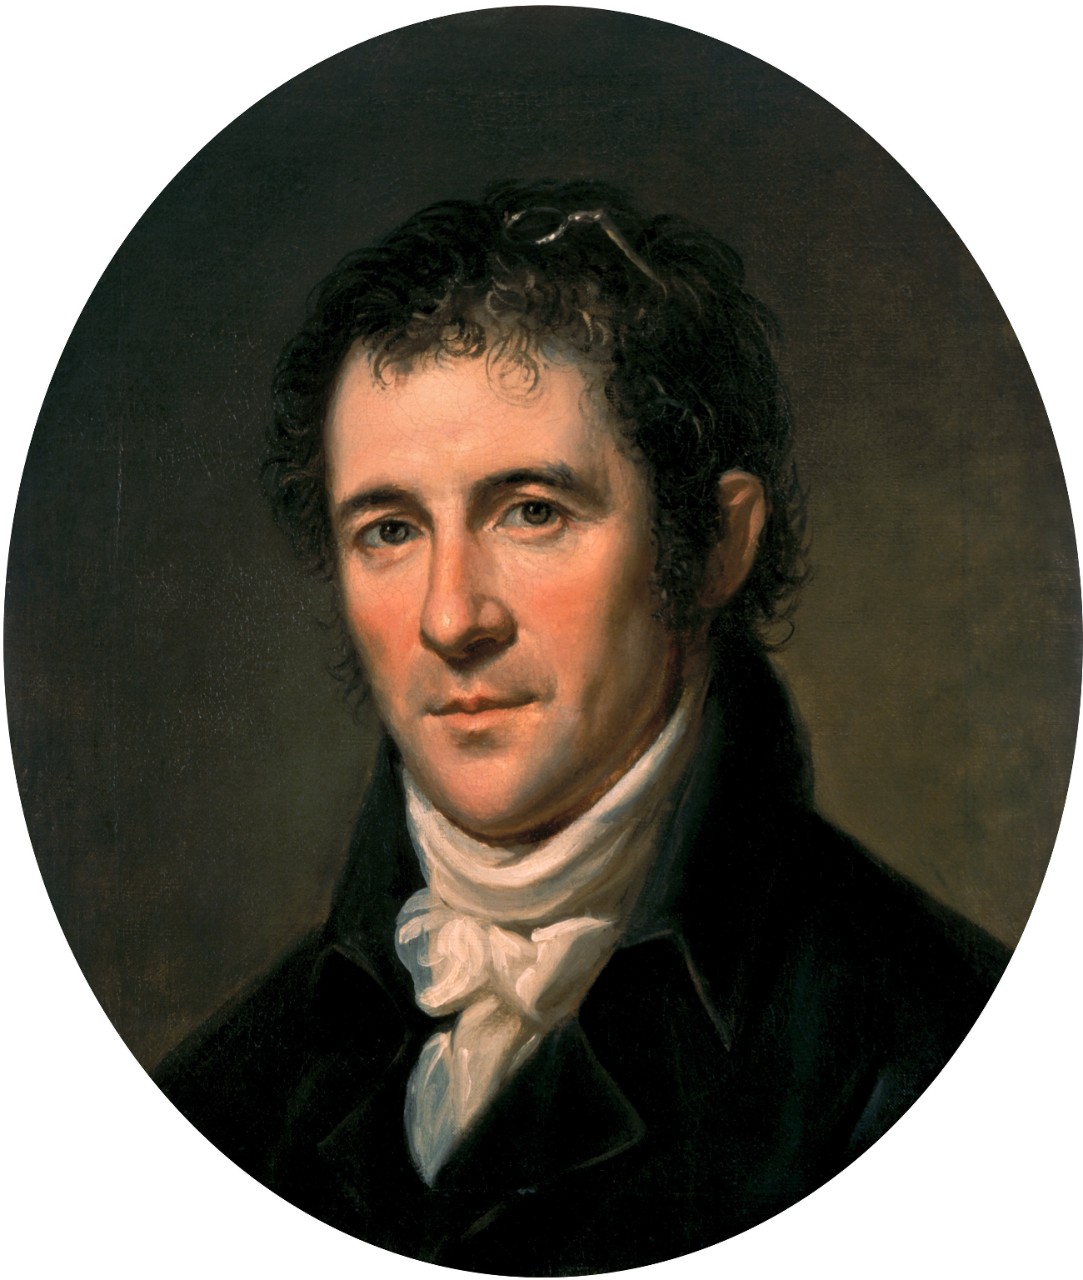 Portrait of British-born architect Benjamin Latrobe. Best known for his design of the United States Capitol, Latrobe came to the United States in 1796. In 1803, the U.S. hired Latrobe as Surveyor for the Public Buildings of the United States, and...